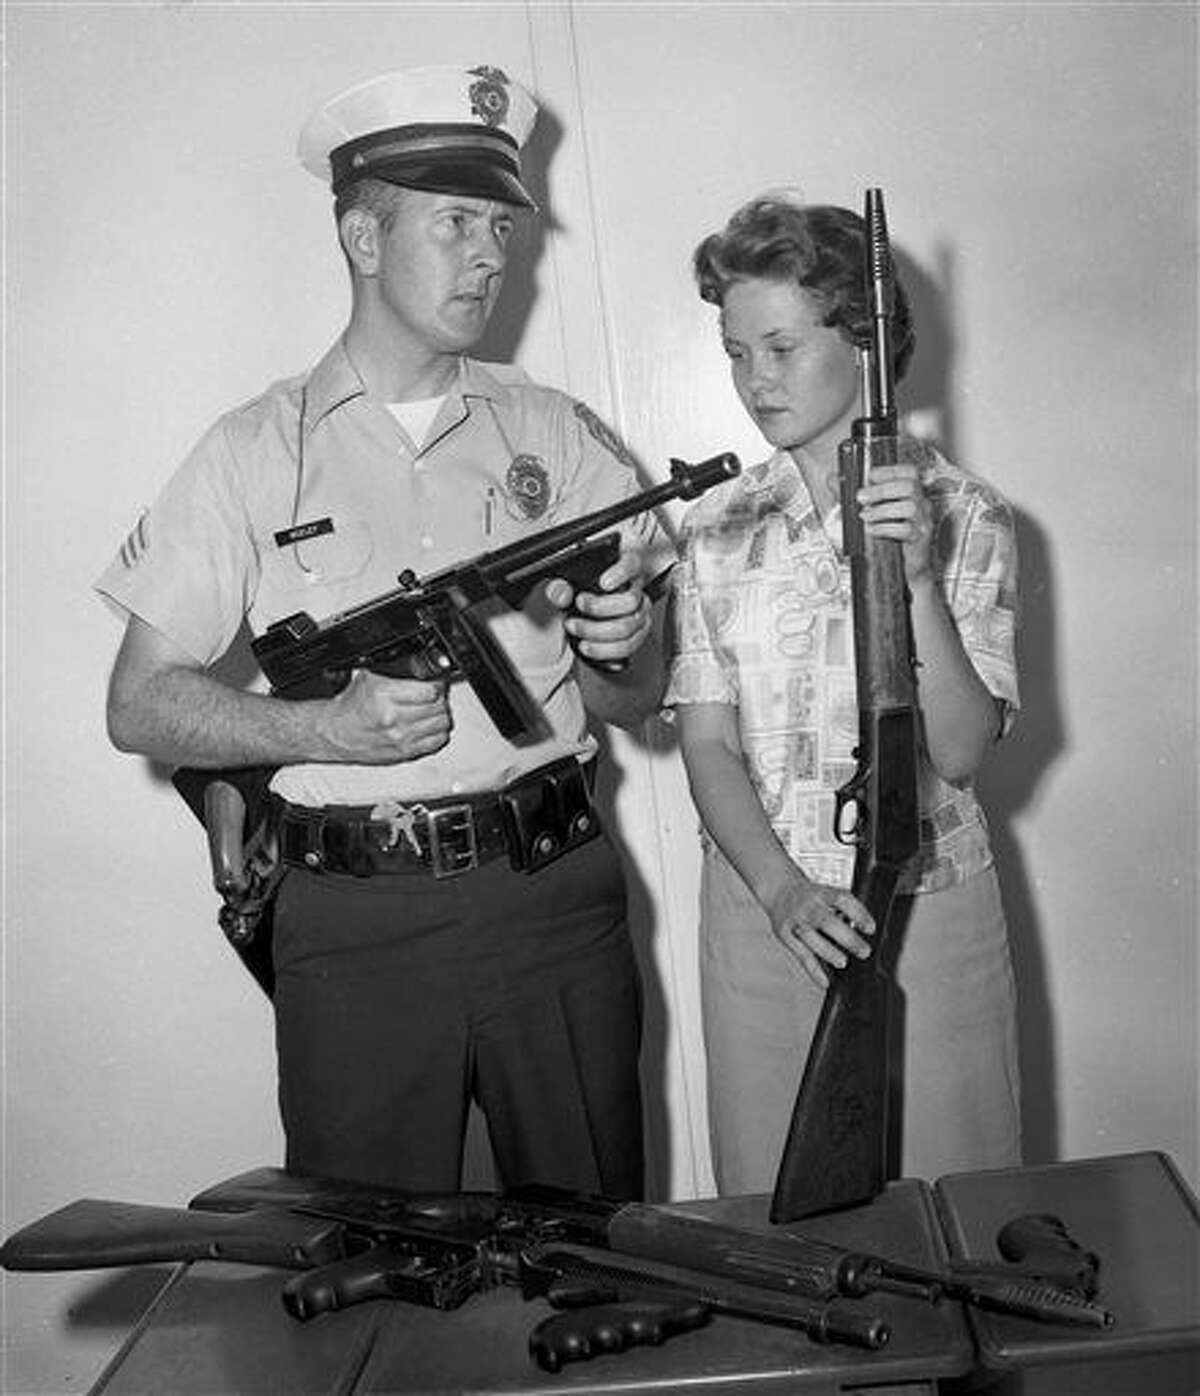 In this 1961 photo, Tucson Police Sgt. Tom Keeley holds a Colt Thompson submachine gun and secretary Linda Bradfield holds a Winchester Model 1907, with other guns confiscated from the John Dillinger gang during Dillinger's capture in Tucson, Ariz., in 1934. Police in Tucson are at odds with a small Indiana town over the Tommy gun taken from Dillinger during his arrest. The Arizona Daily Star reports that officials in Peru, Ind., want the Colt Thompson submachine gun turned over, saying they believe it was stolen from Peru police in 1933 before Dillinger was caught in Tucson. (Tucson Citizen Archive/Arizona Daily Star via AP)